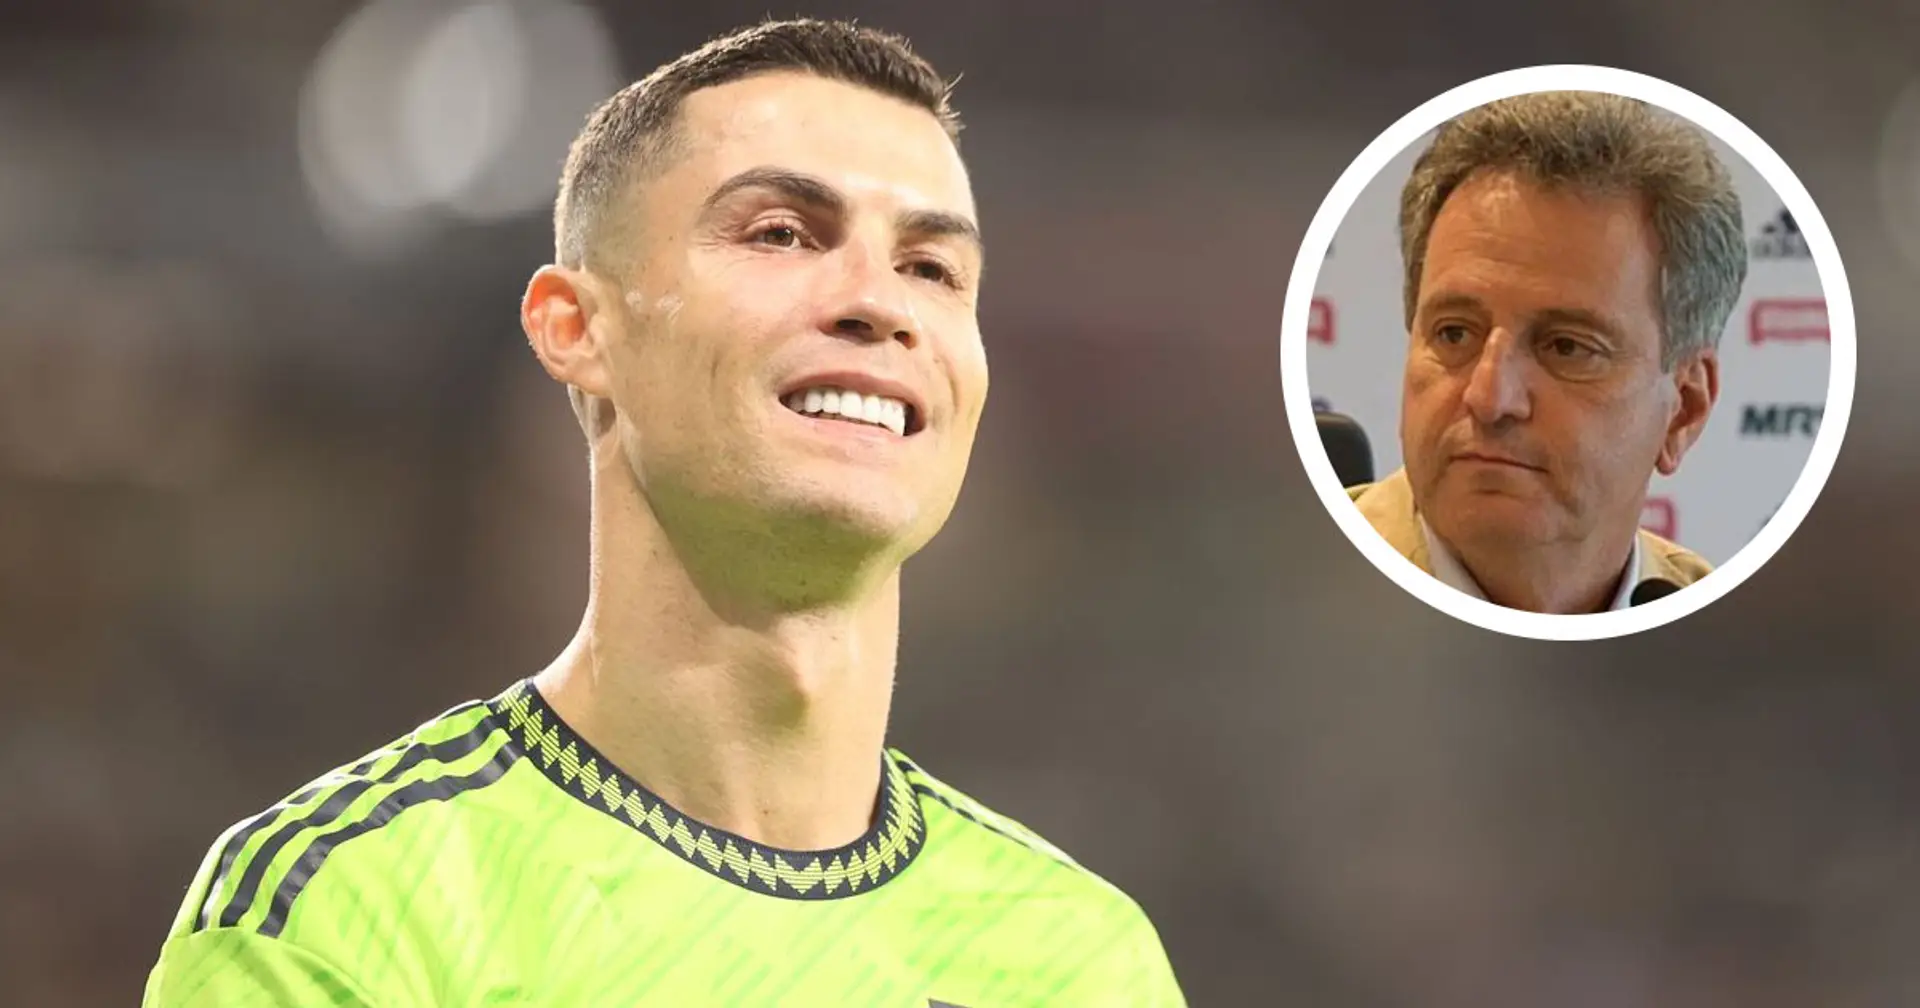 'To be a substitute?': Flamengo president savages Ronaldo transfer links